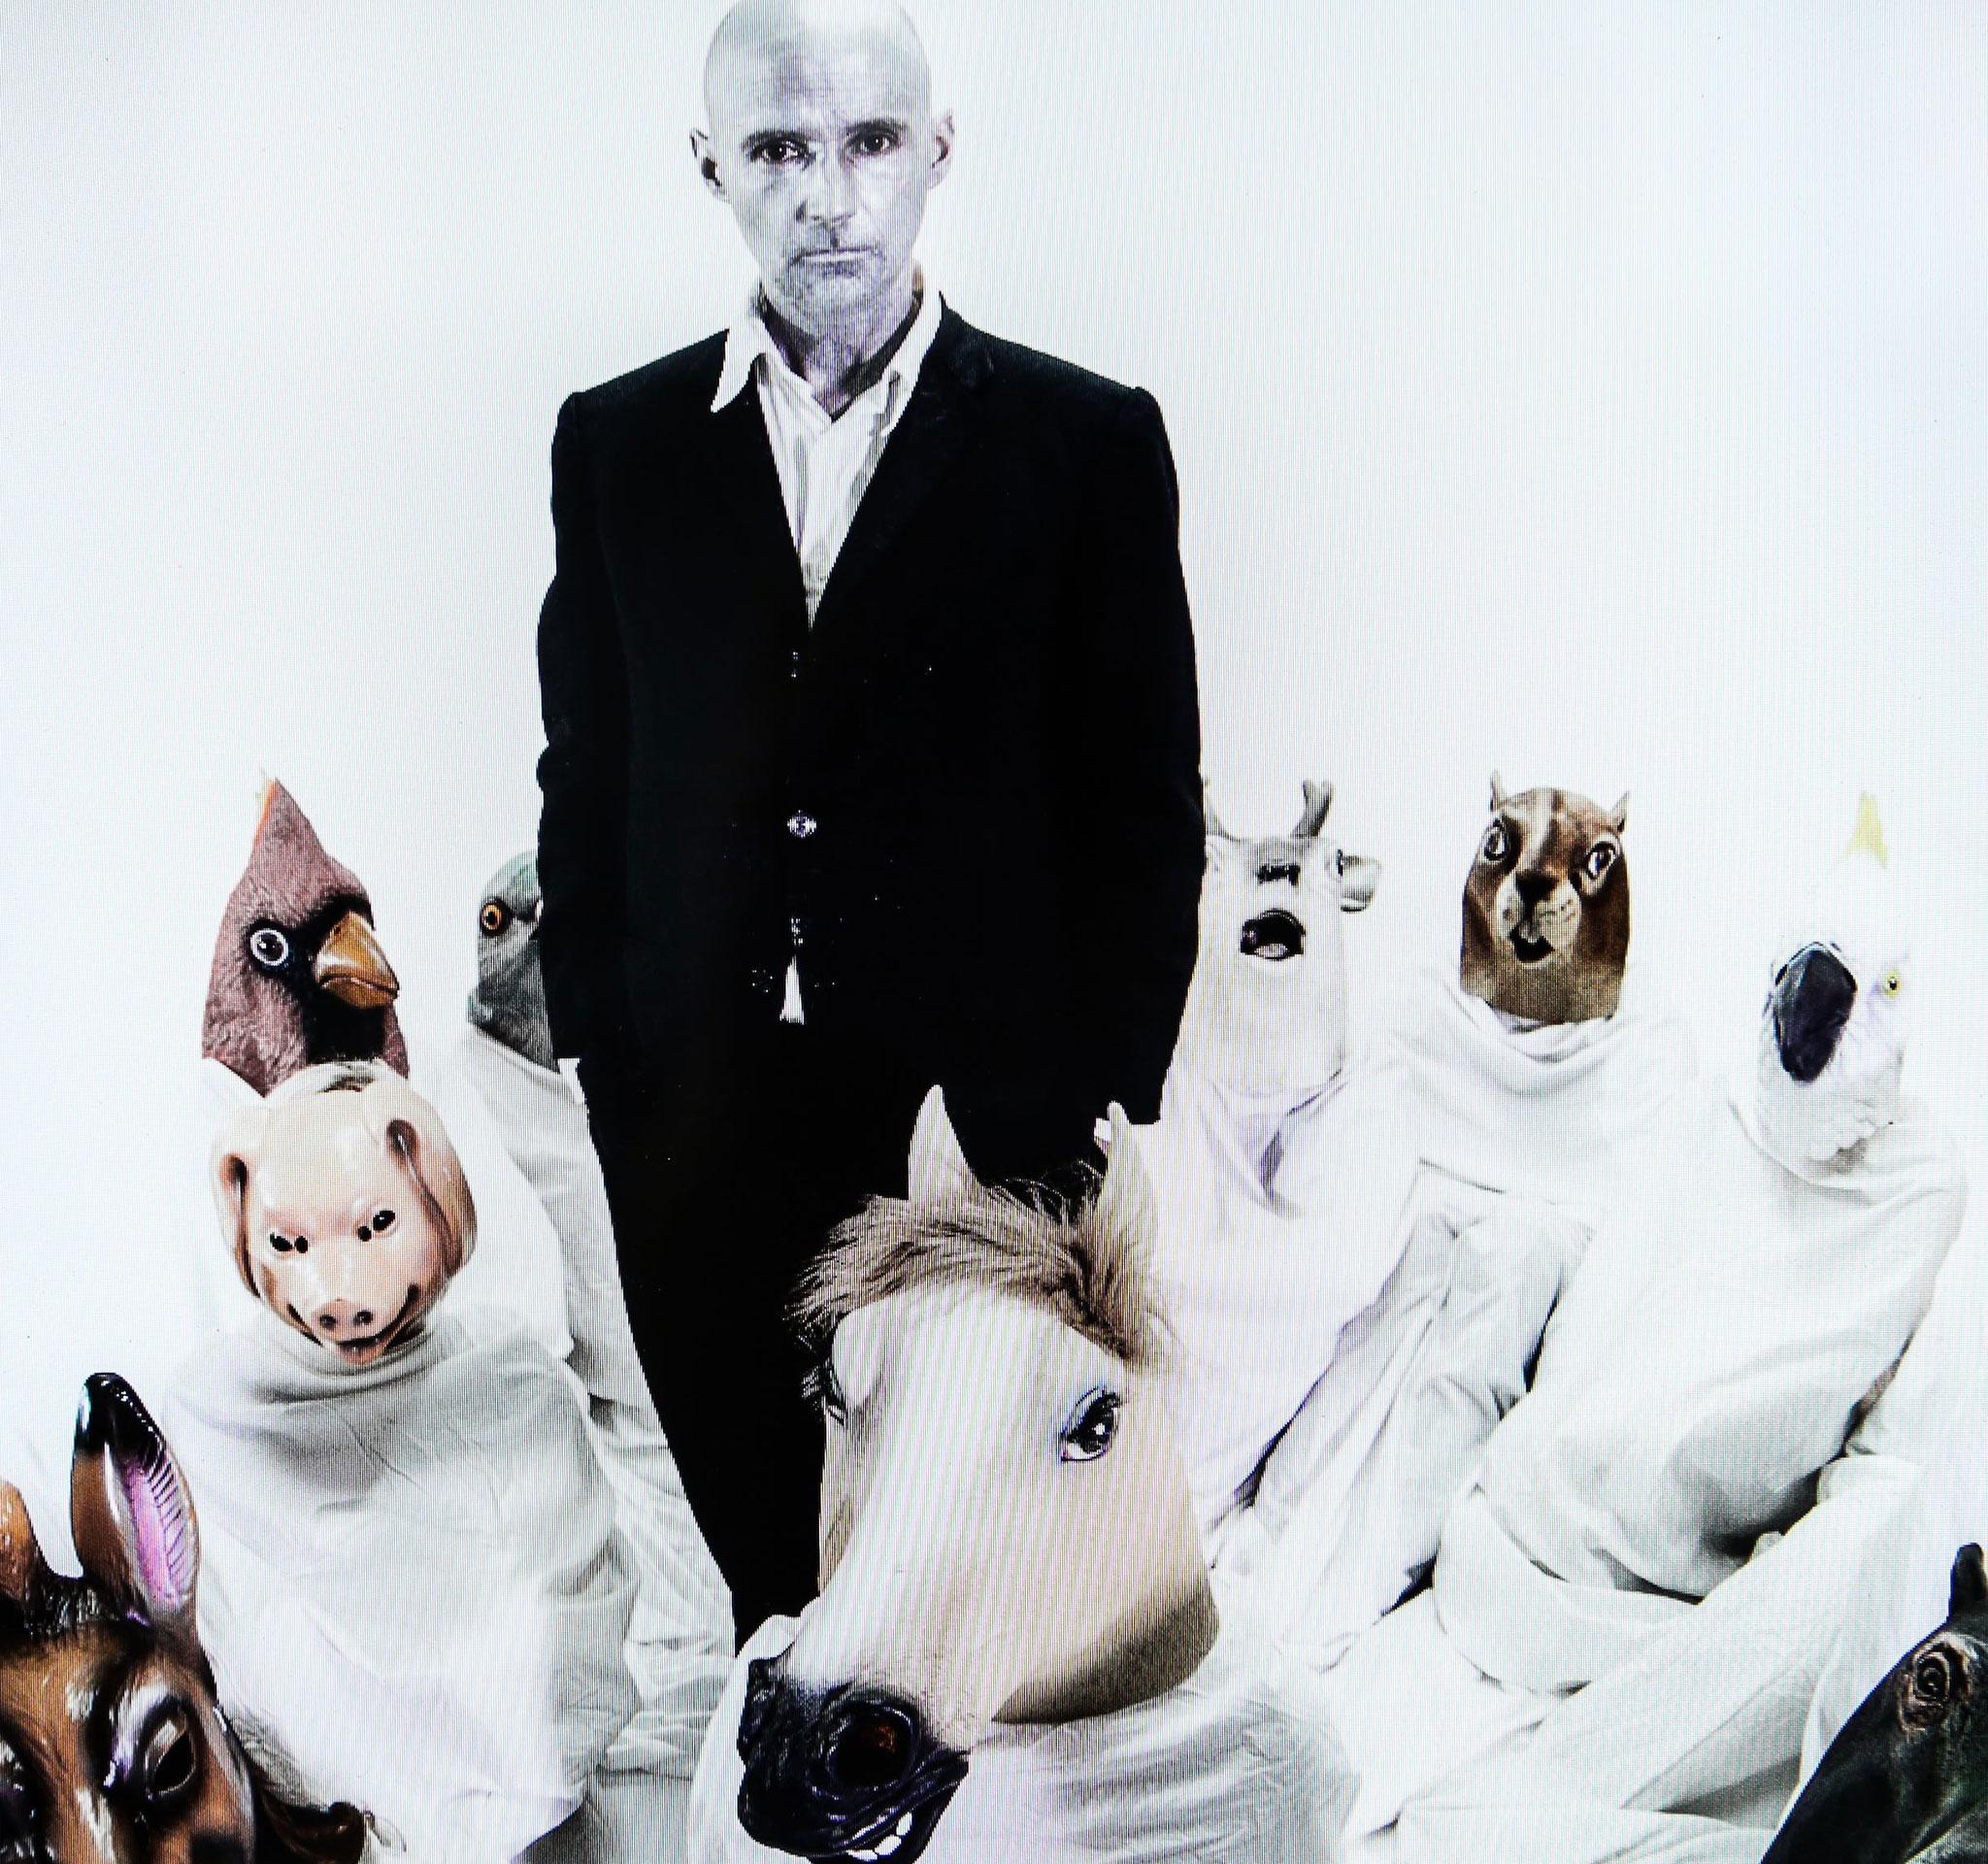 Moby - Image by Melissa Danis